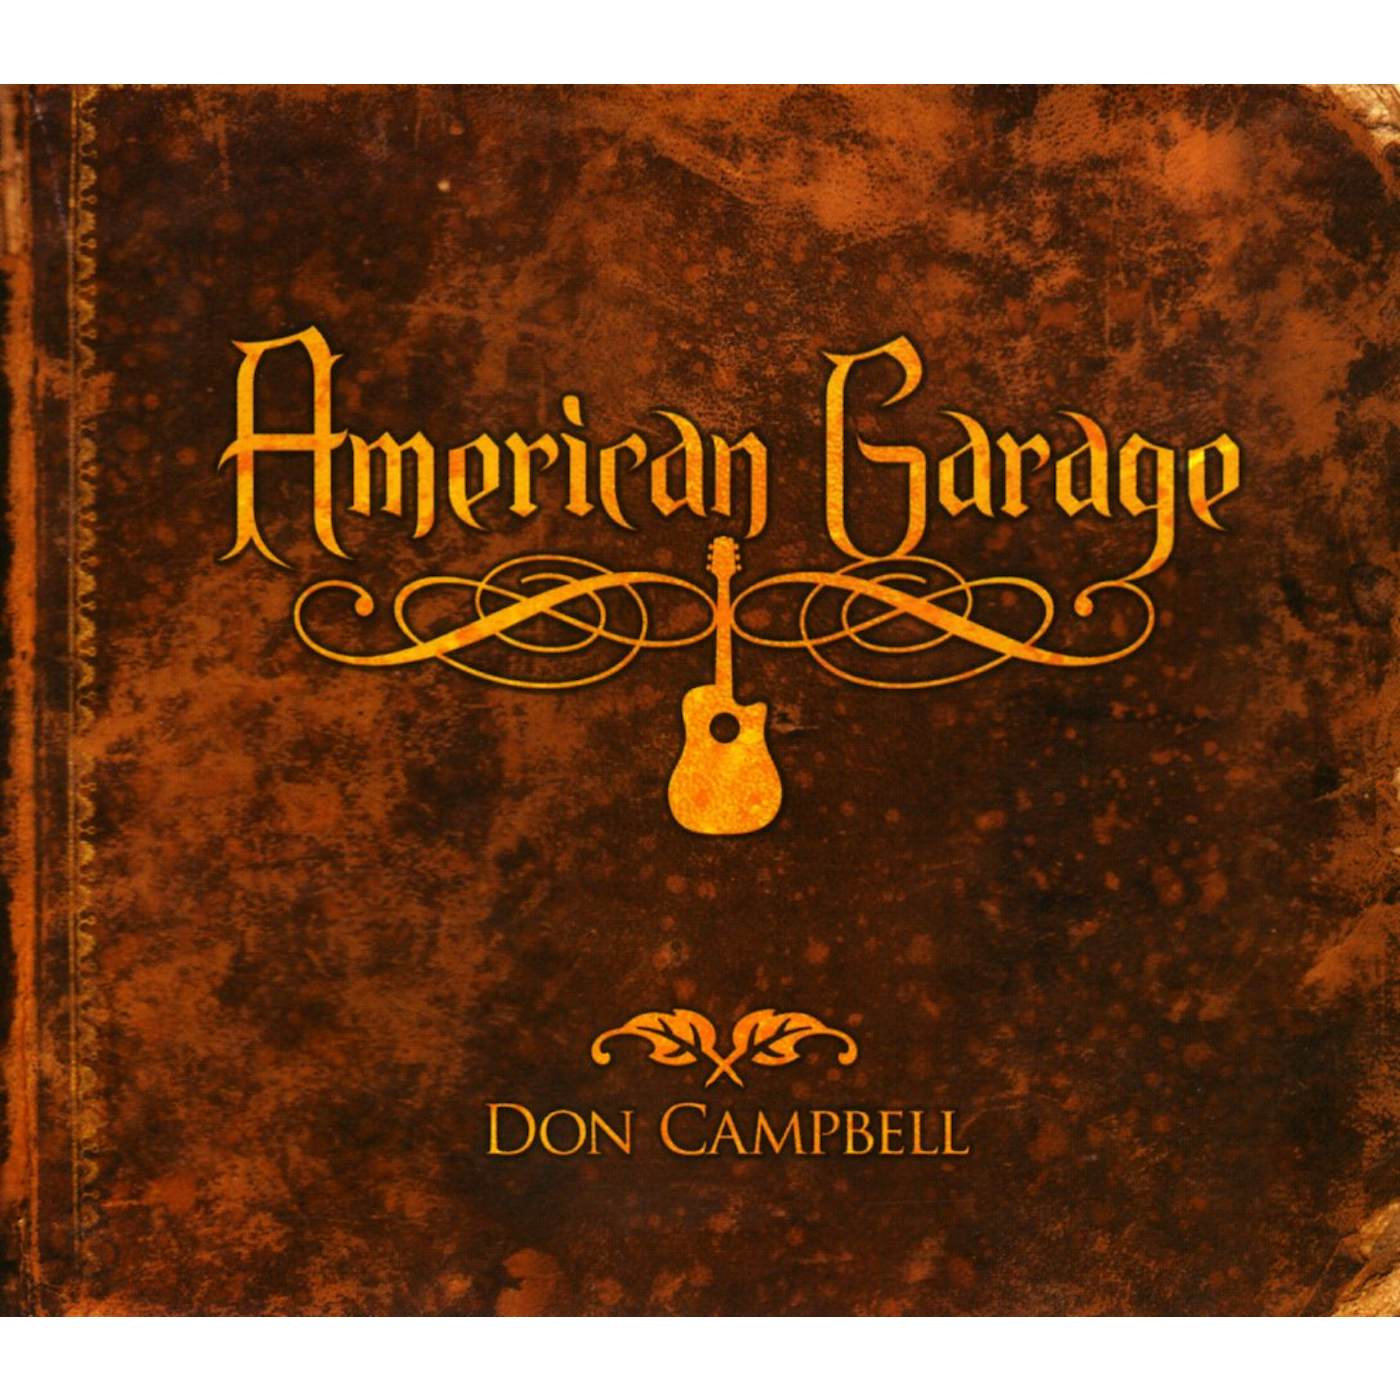 Don Campbell AMERICAN GARAGE CD